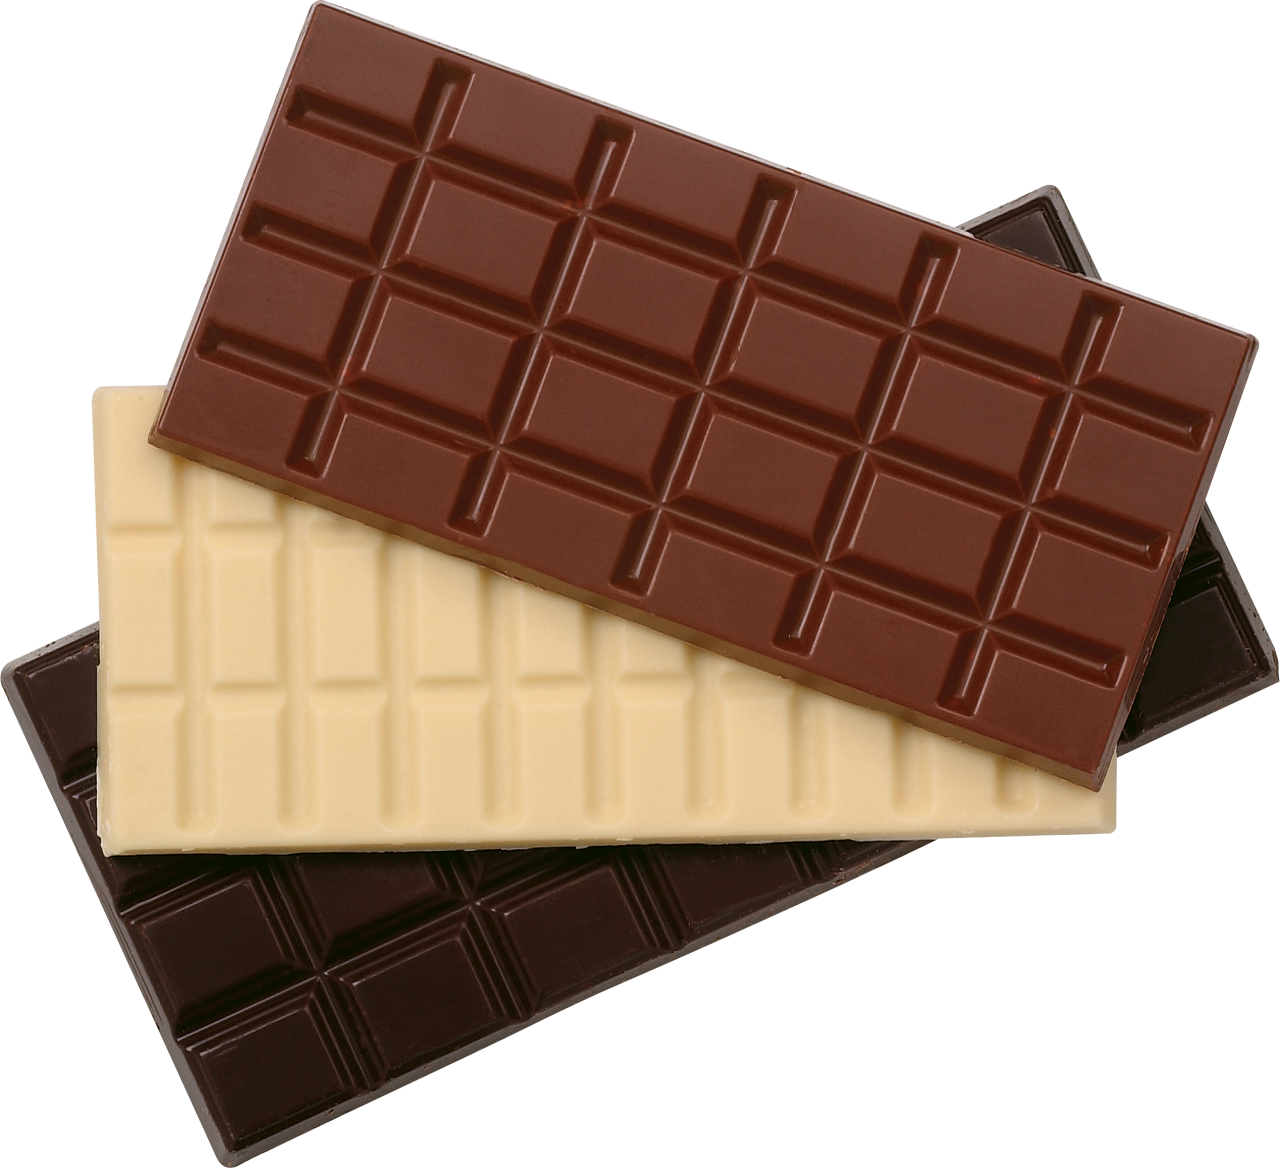 Chocolate PNG Image - PurePNG | Free transparent CC0 PNG Image Library